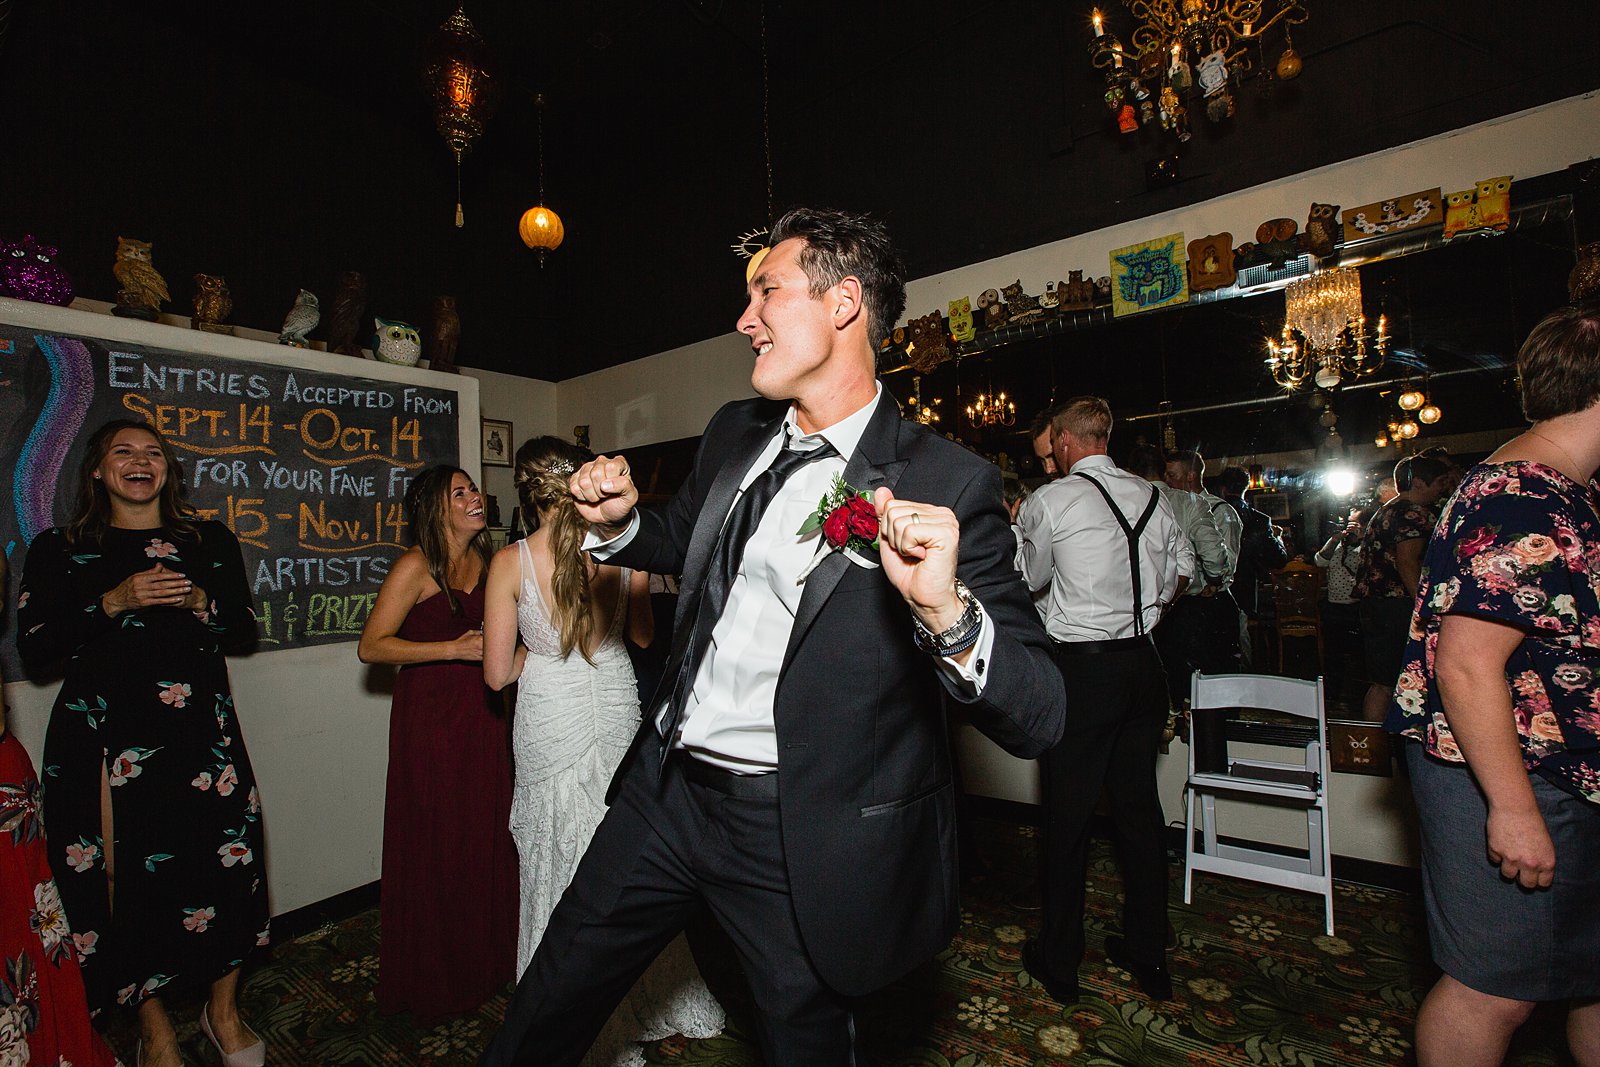 Groom dancing with guests at Toasted Owl wedding reception by Flagstaff wedding photographer PMA Photography